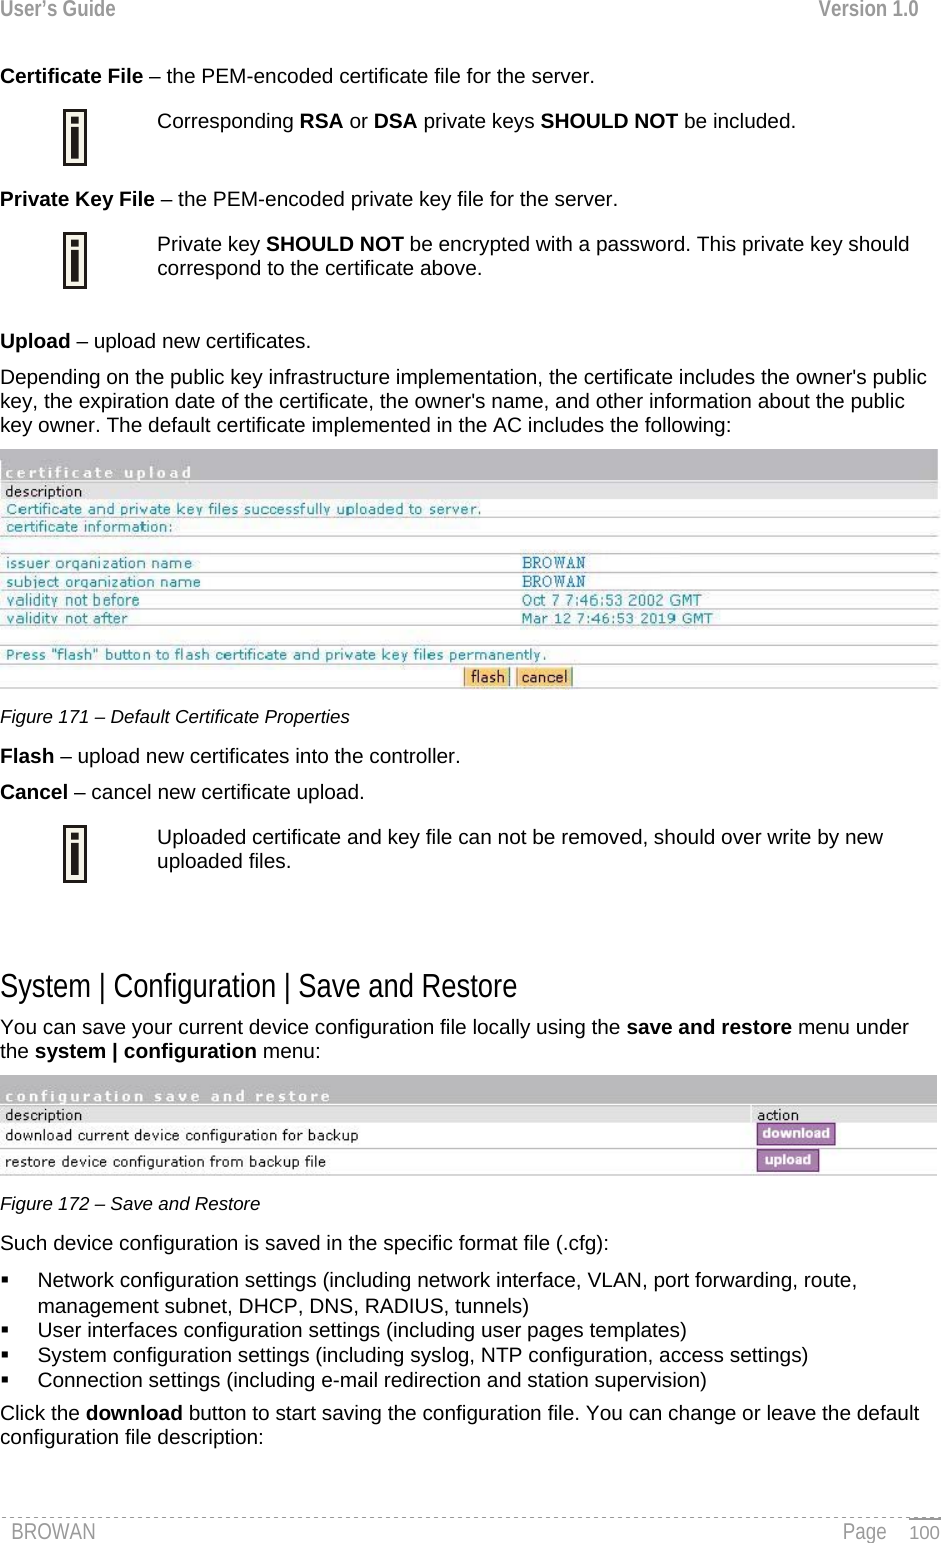 User’s Guide  Version 1.0  Certificate File – the PEM-encoded certificate file for the server. Corresponding RSA or DSA private keys SHOULD NOT be included.   Private Key File – the PEM-encoded private key file for the server. Private key SHOULD NOT be encrypted with a password. This private key should correspond to the certificate above.   Upload – upload new certificates. Depending on the public key infrastructure implementation, the certificate includes the owner&apos;s public key, the expiration date of the certificate, the owner&apos;s name, and other information about the public key owner. The default certificate implemented in the AC includes the following:  Figure 171 – Default Certificate Properties Flash – upload new certificates into the controller. Cancel – cancel new certificate upload. Uploaded certificate and key file can not be removed, should over write by new uploaded files.    System | Configuration | Save and Restore   You can save your current device configuration file locally using the save and restore menu under the system | configuration menu:  Figure 172 – Save and Restore Such device configuration is saved in the specific format file (.cfg):   Network configuration settings (including network interface, VLAN, port forwarding, route, management subnet, DHCP, DNS, RADIUS, tunnels)   User interfaces configuration settings (including user pages templates)   System configuration settings (including syslog, NTP configuration, access settings)   Connection settings (including e-mail redirection and station supervision) Click the download button to start saving the configuration file. You can change or leave the default configuration file description: BROWAN                                                                                                                                               Page   100